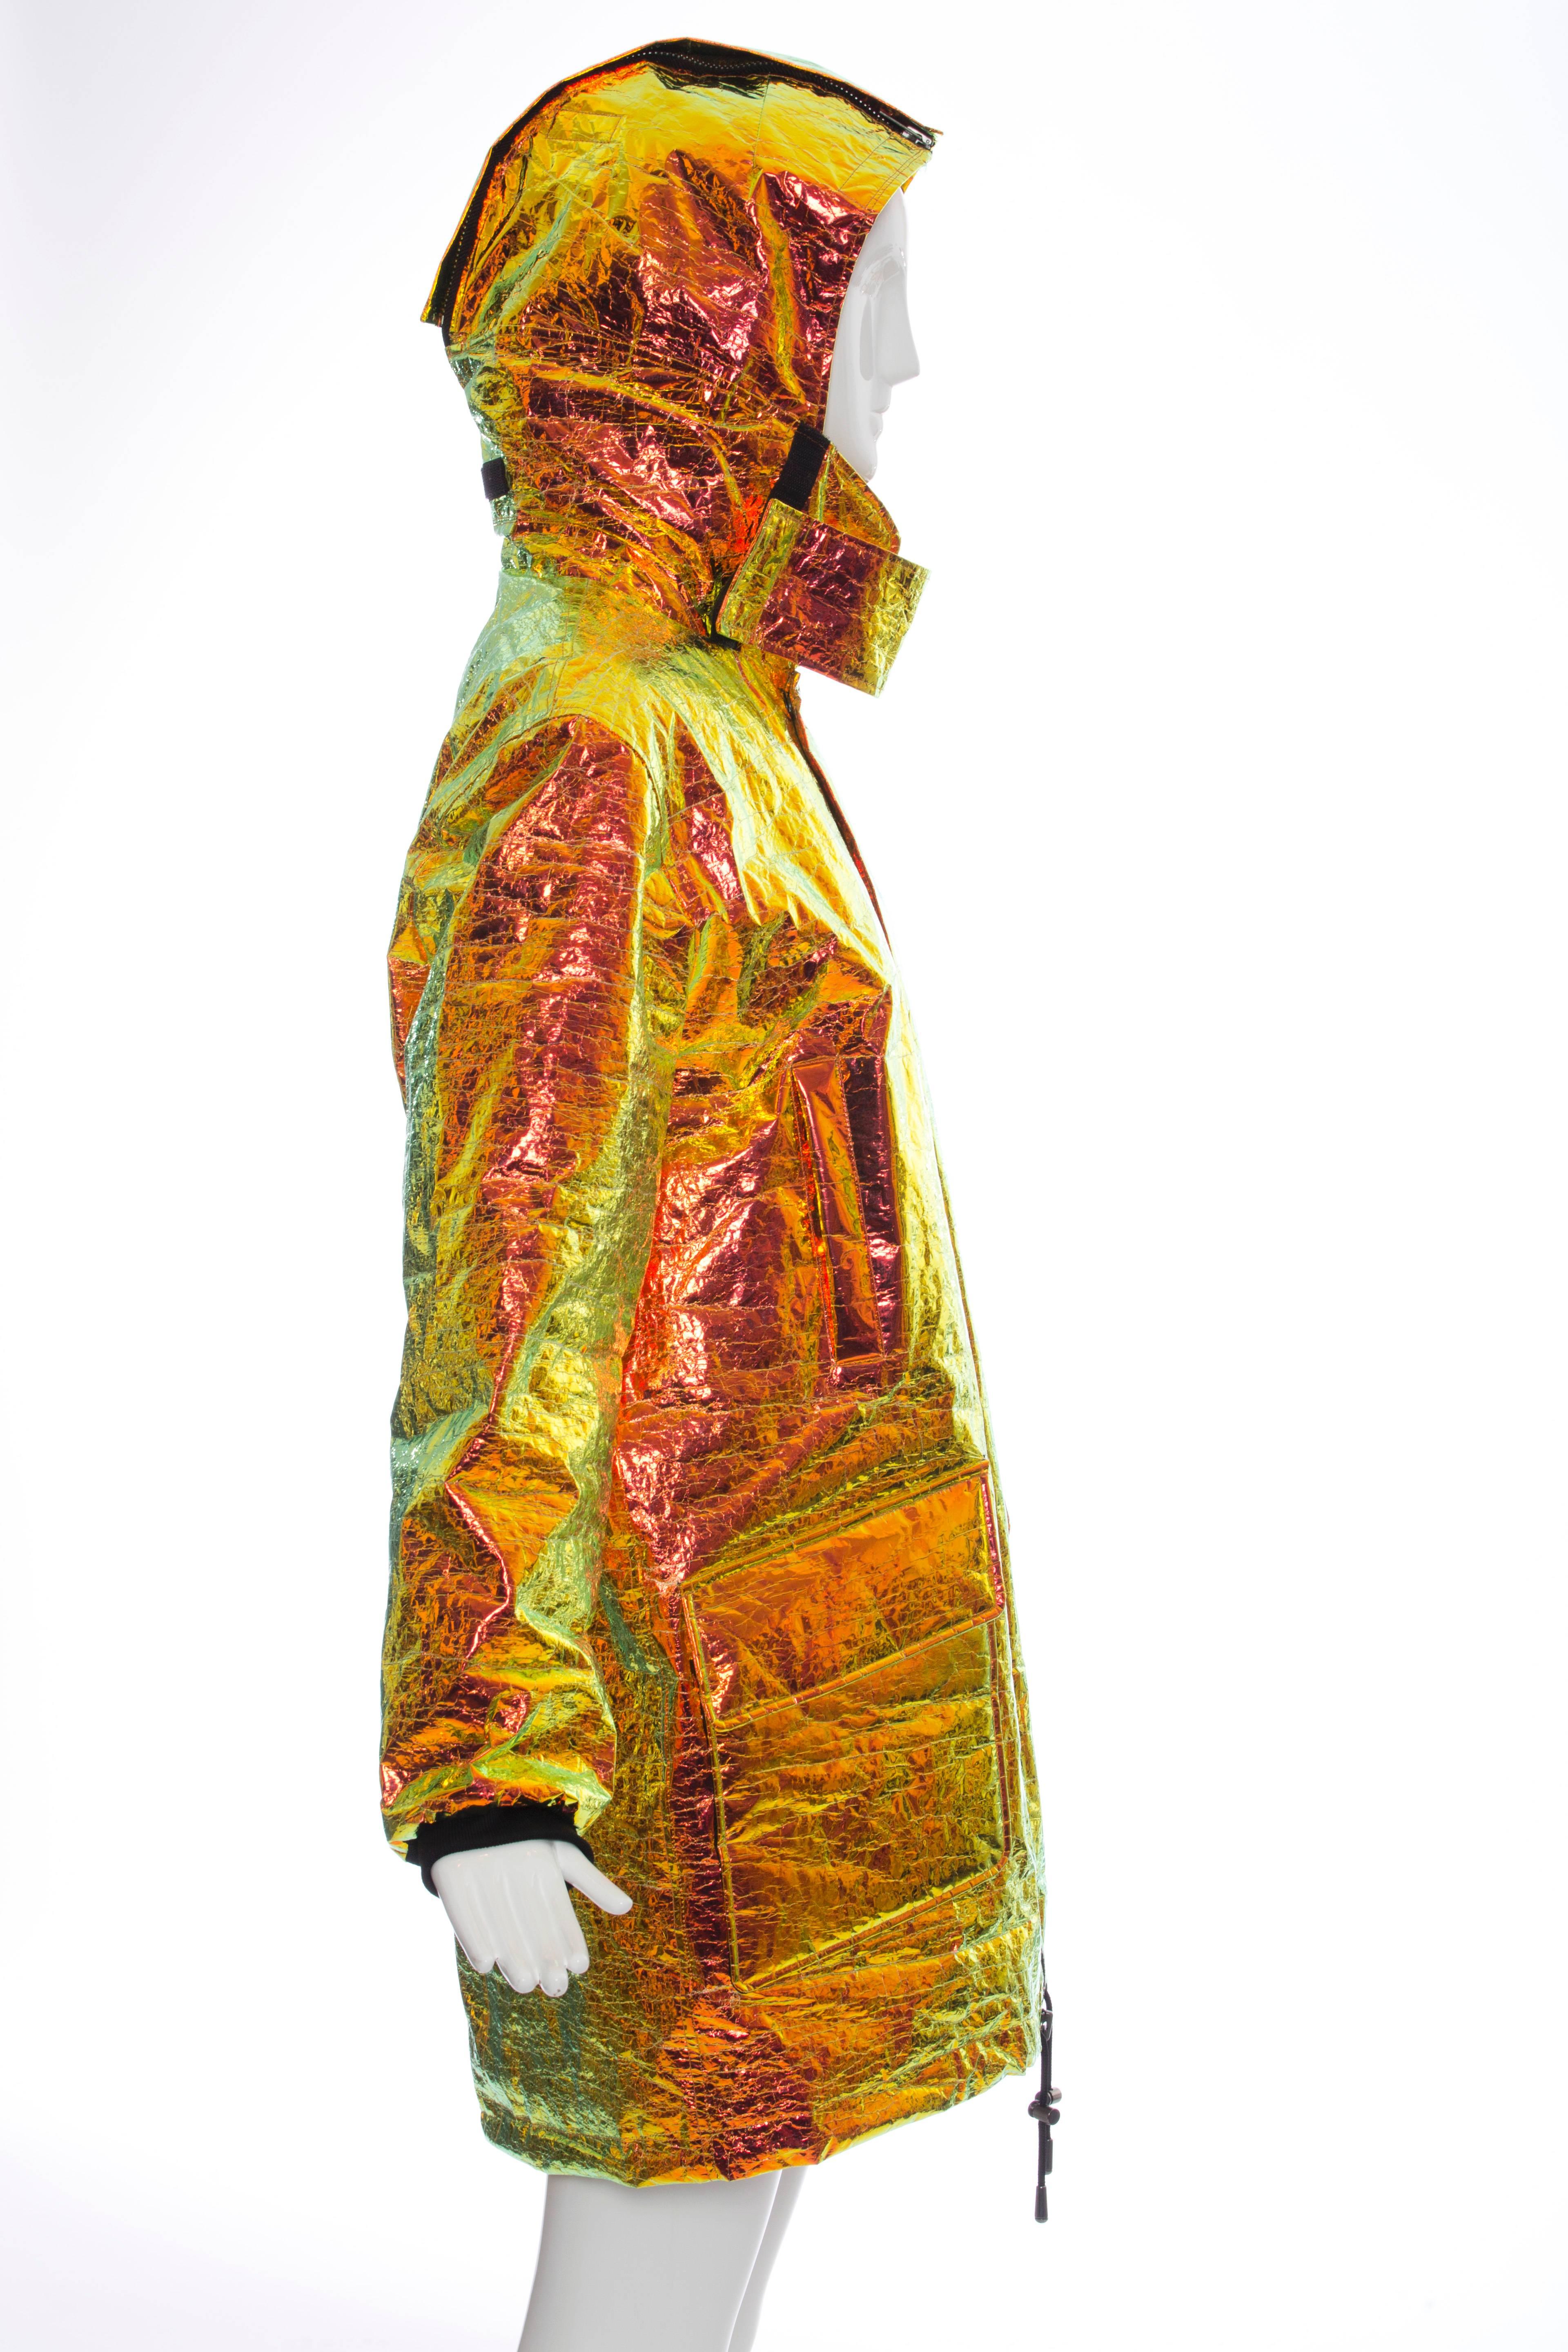 Wanda Nylon, Autumn-Winter 2014, iridescent metallic foil hooded parka, four front pockets, zip and snap front closure, hooded zip and fully lined.

Seen on M.I.A. and Snoop Dog.